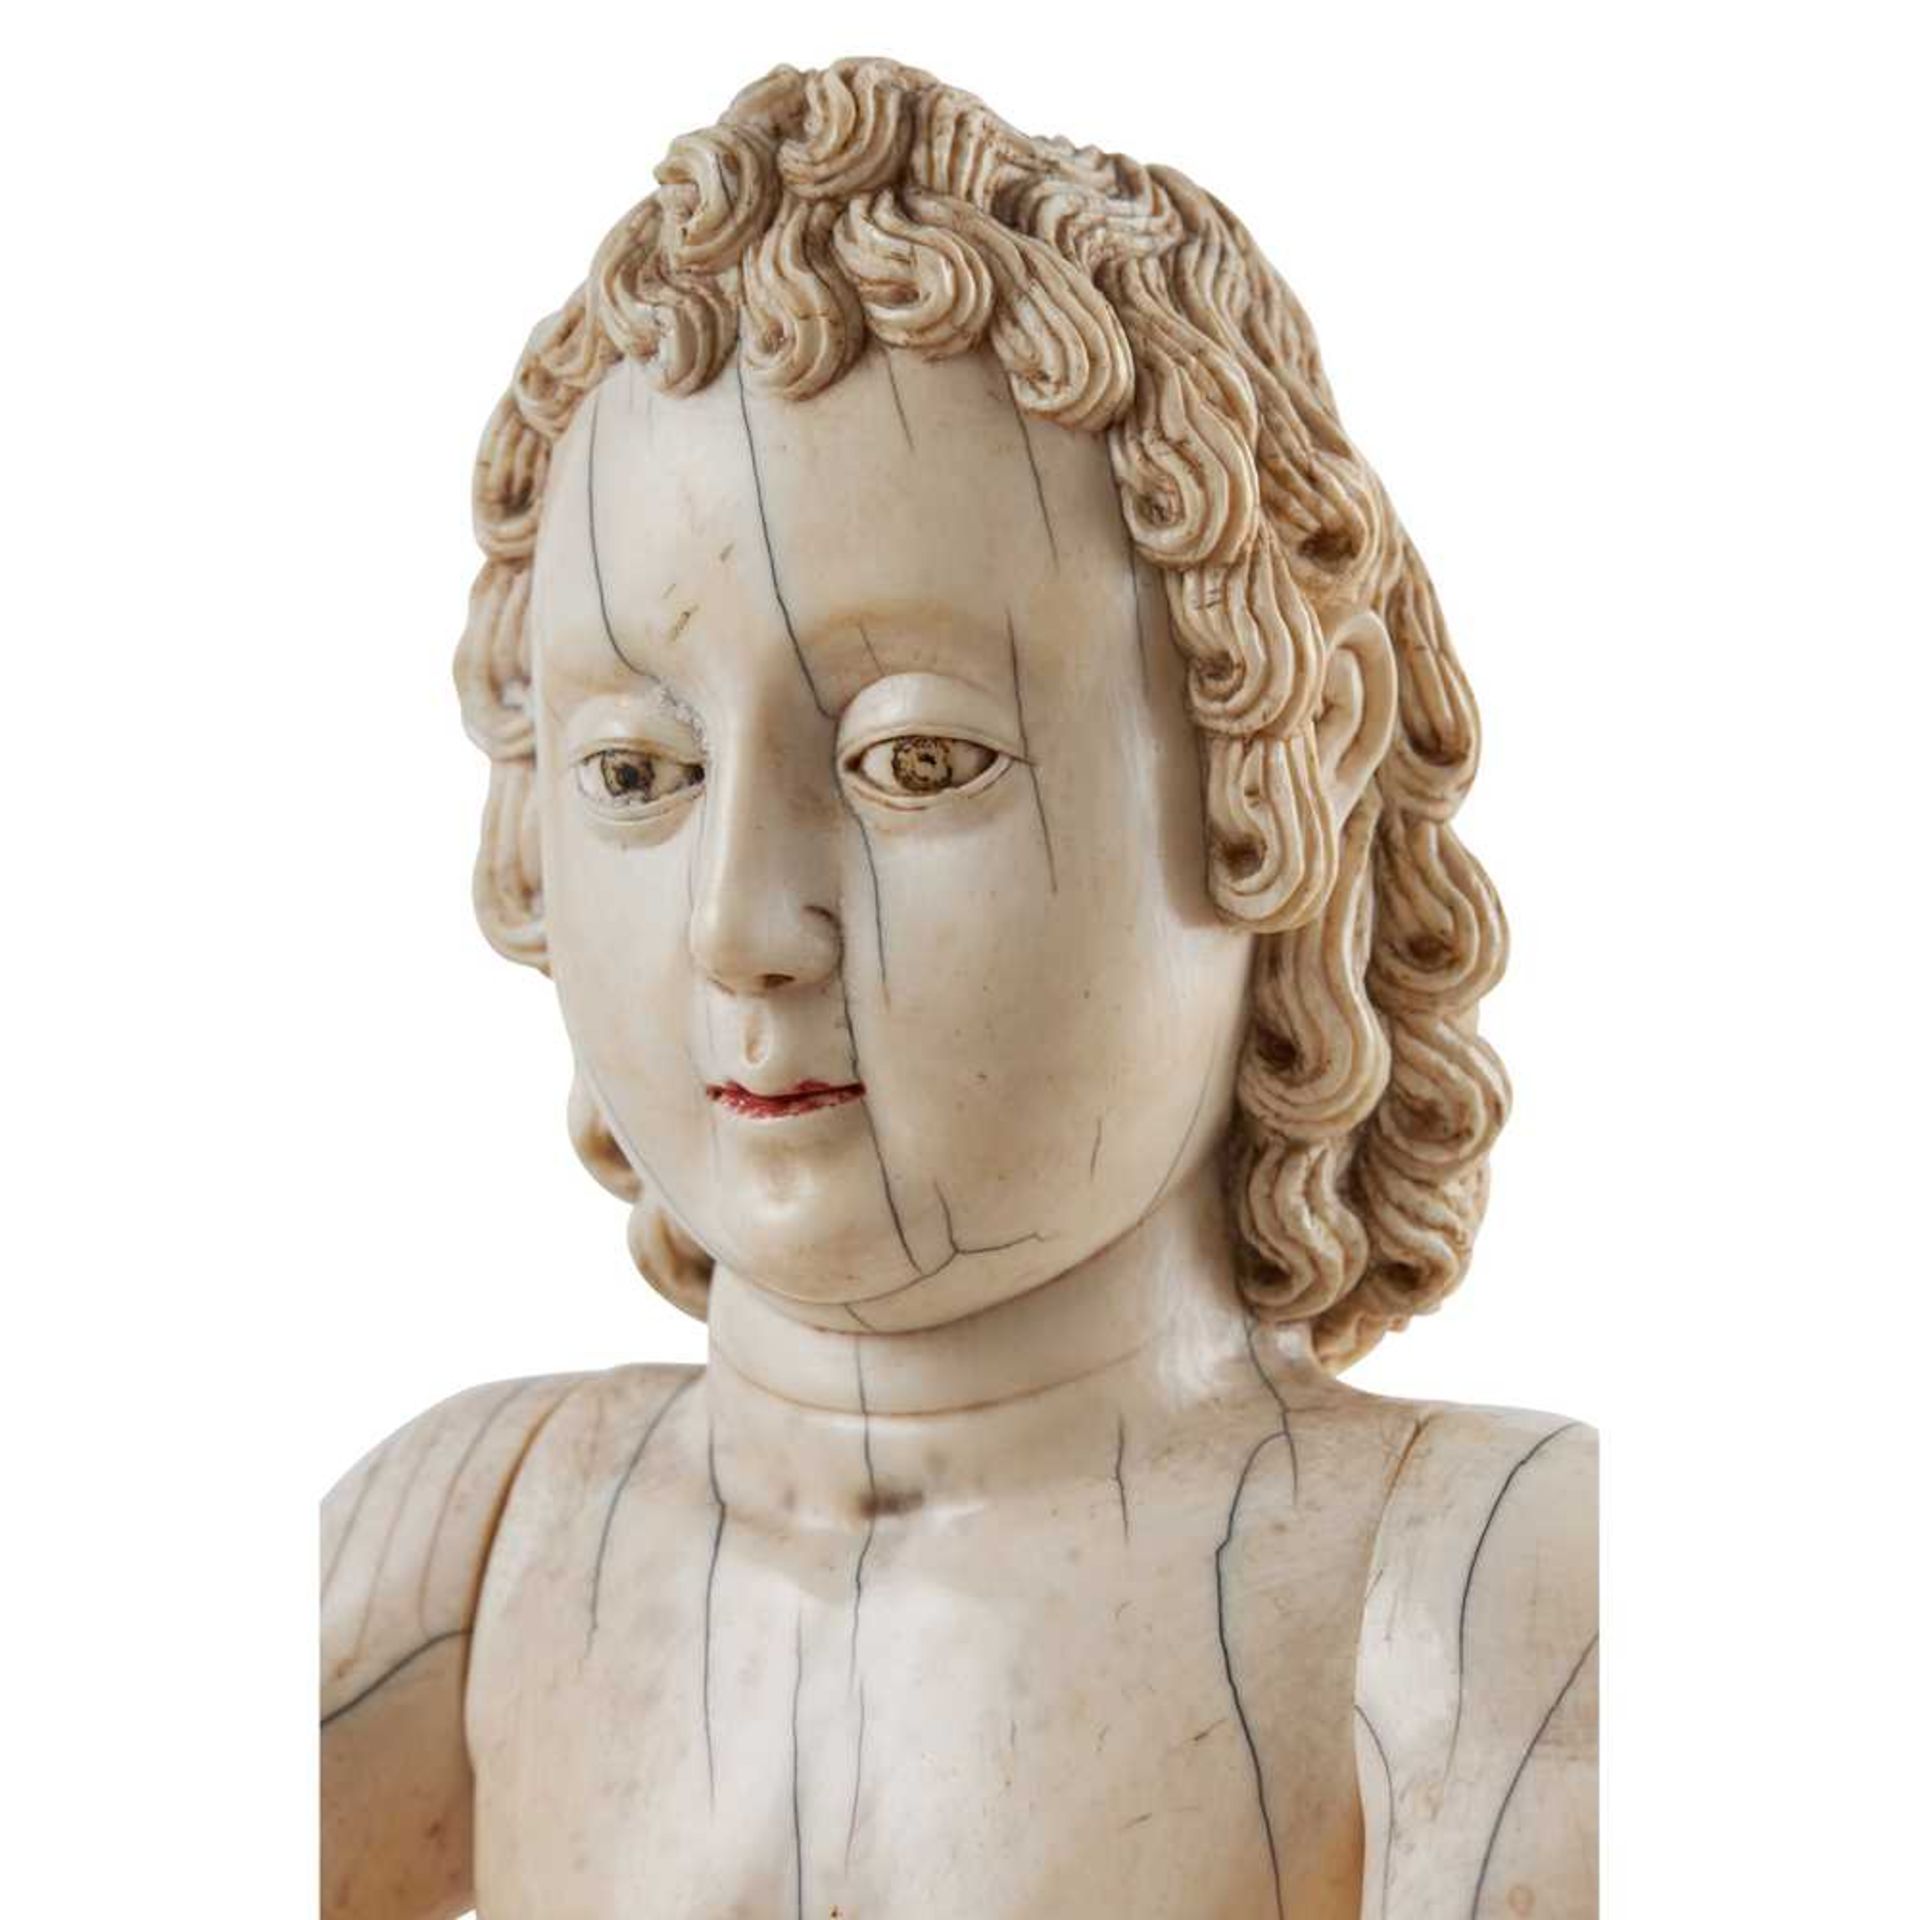 LARGE INDO-PORTUGUESE CARVED IVORY FIGURE OF THE INFANT CHRIST AS SALVATOR MUNDI, THE SAVIOUR OF THE - Image 5 of 7